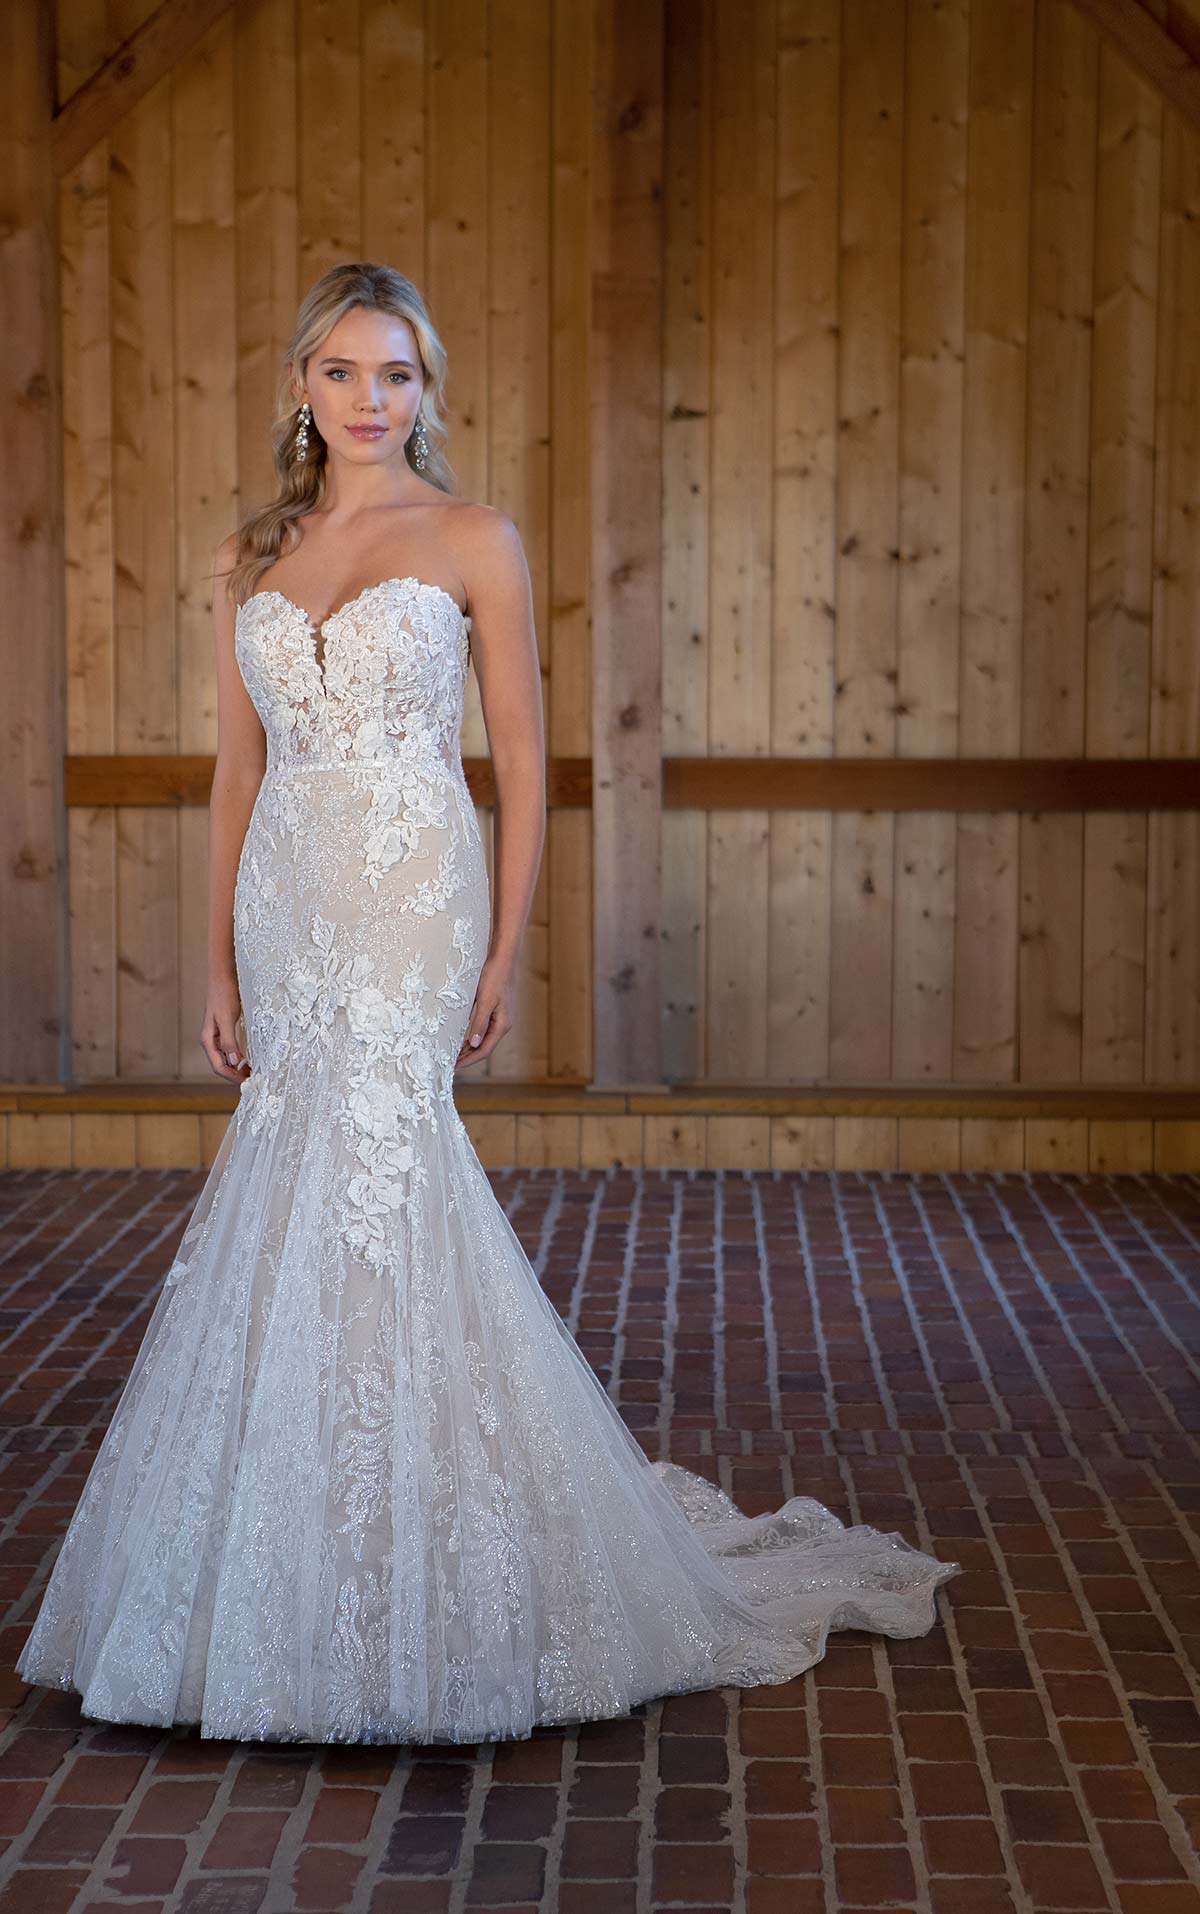 Lace Sweetheart Neckline Wedding Dress with Detachable Off-the-Shoulder  Sleeves - D3414  Wedding dress necklines, Sweetheart neckline wedding,  Wedding dresses sweetheart neckline